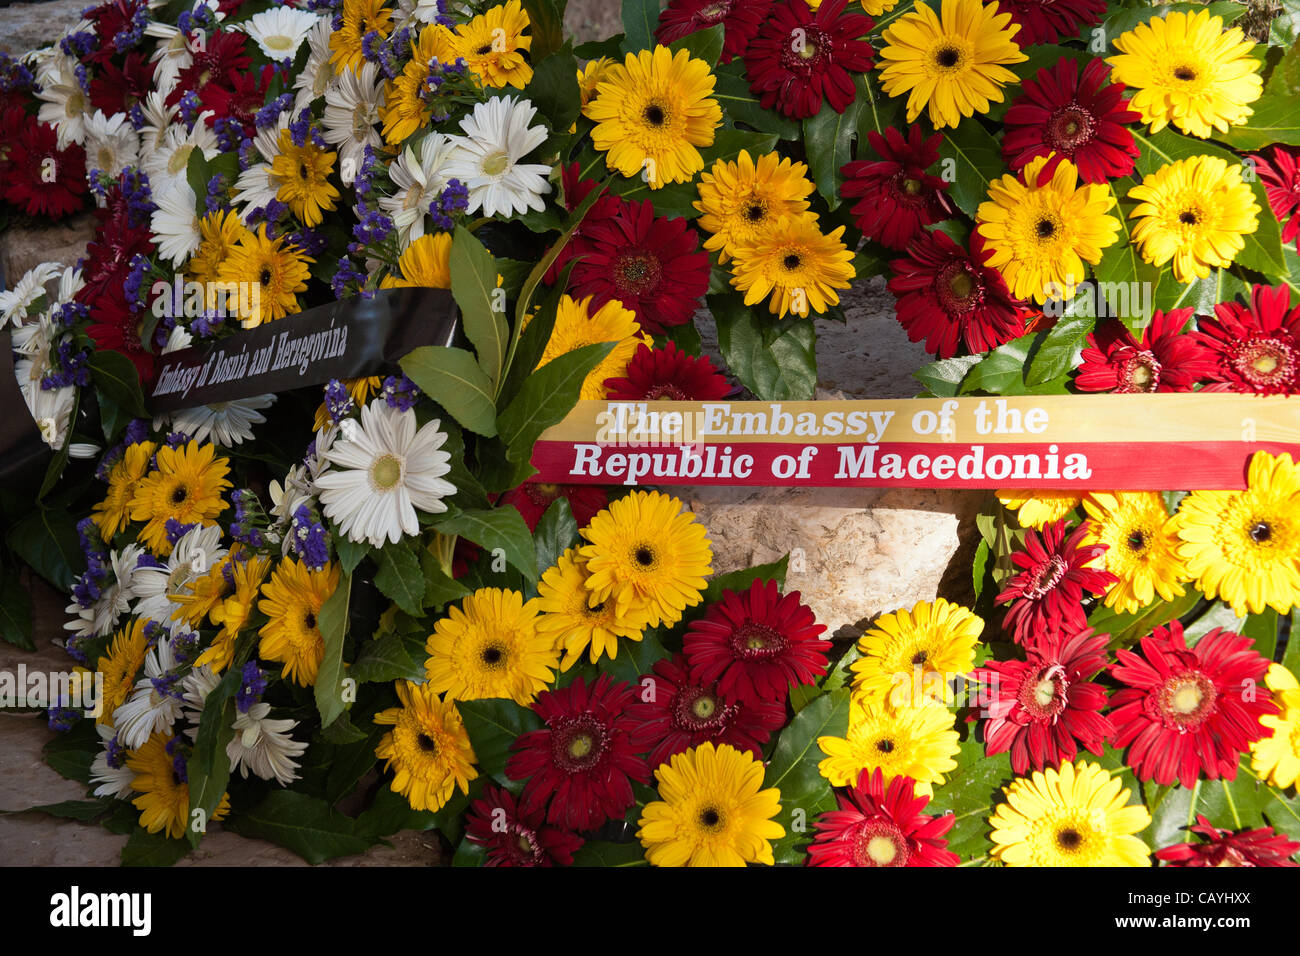 Wreaths of flowers representing countries taking part in ceremony commemorating Allied victory over Nazi Germany at Yad Vashem Holocaust Museum. Jerusalem, Israel. 9-May-2012. Stock Photo